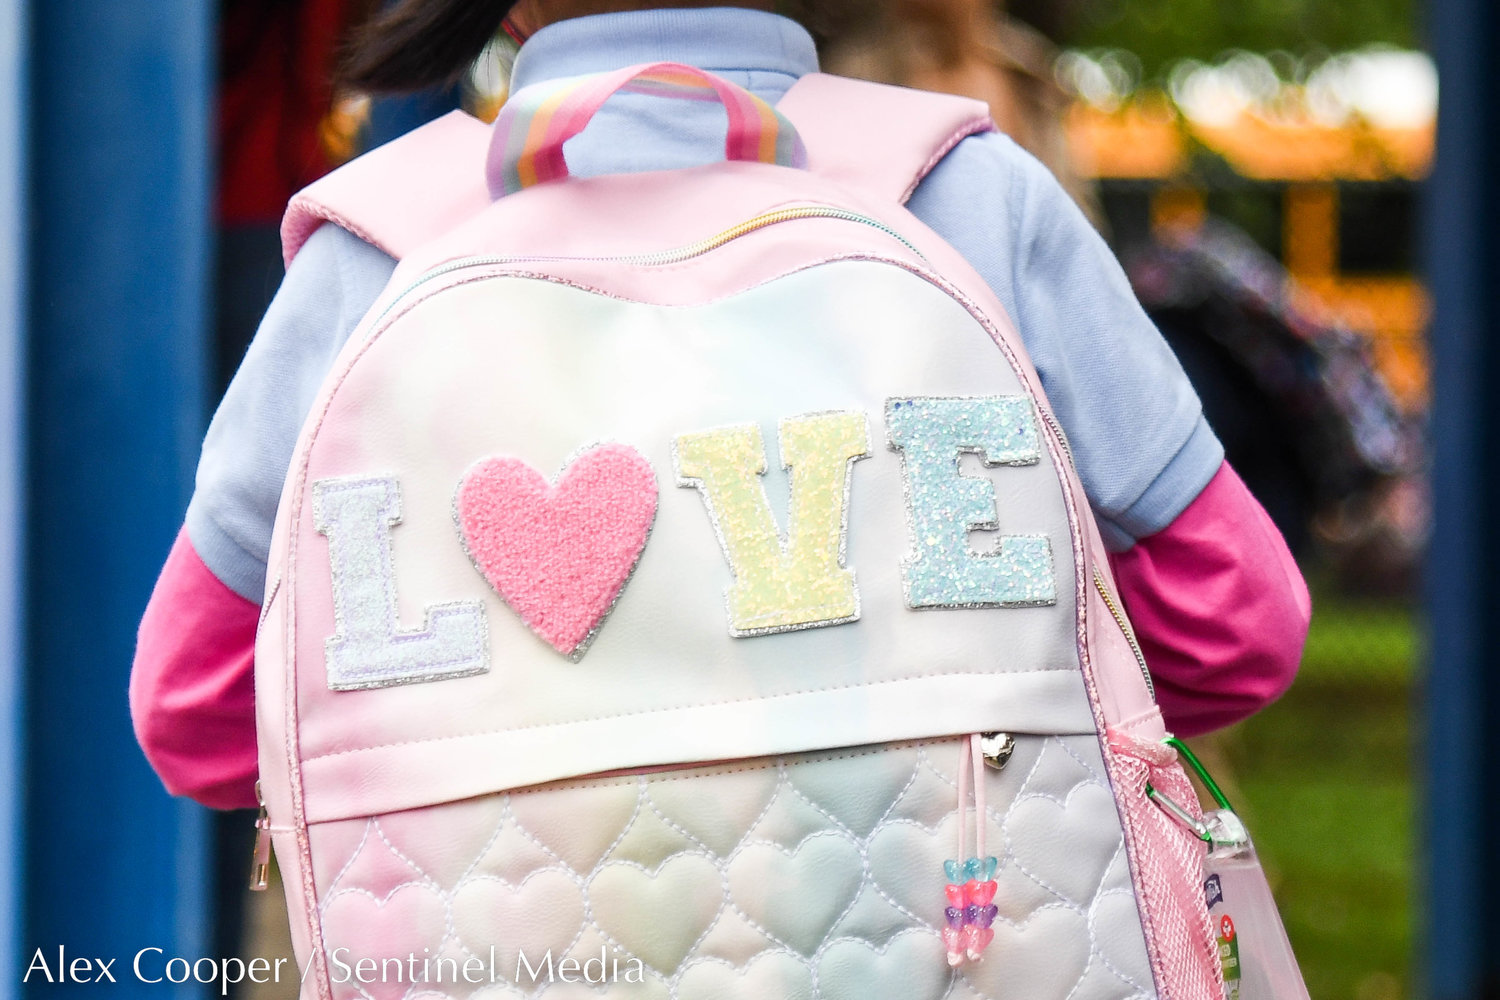 A student sports a "LOVE" backpack outside of Utica Academy of Science Elementary School during the first day back to school on Tuesday in Frankfort.